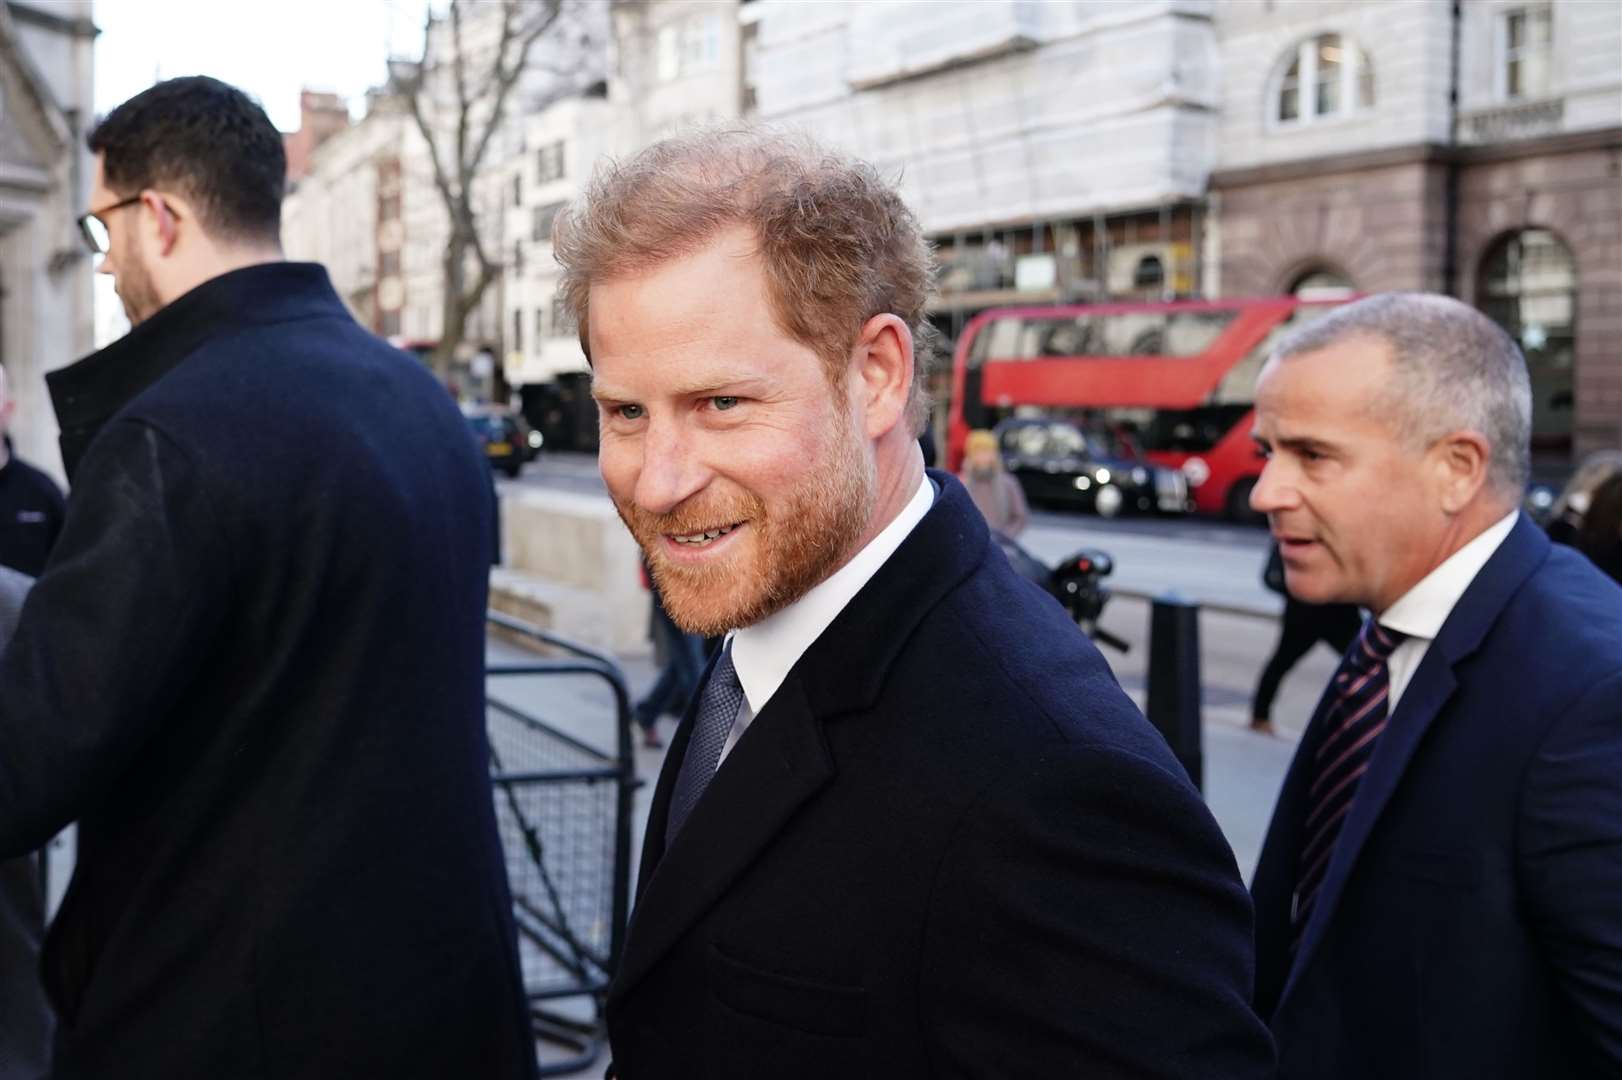 The Duke of Sussex at the Royal Courts Of Justice, central London, in March (Jordan Pettitt/PA)